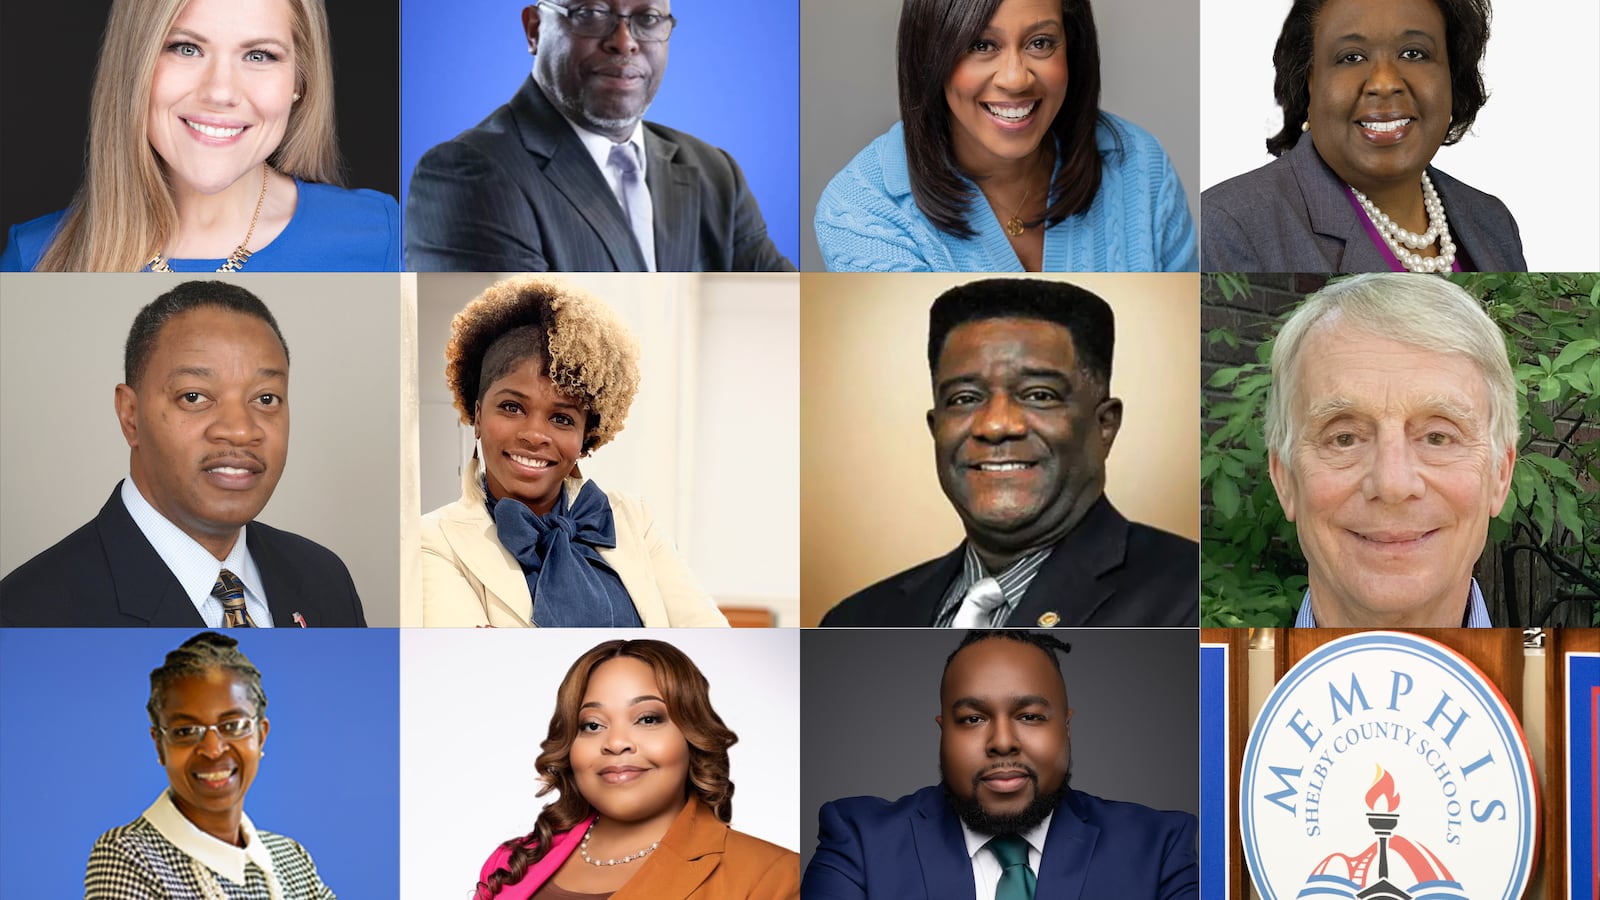 11 school board candidate headshots arranged in a grid with the Memphis-Shelby County Schools logo